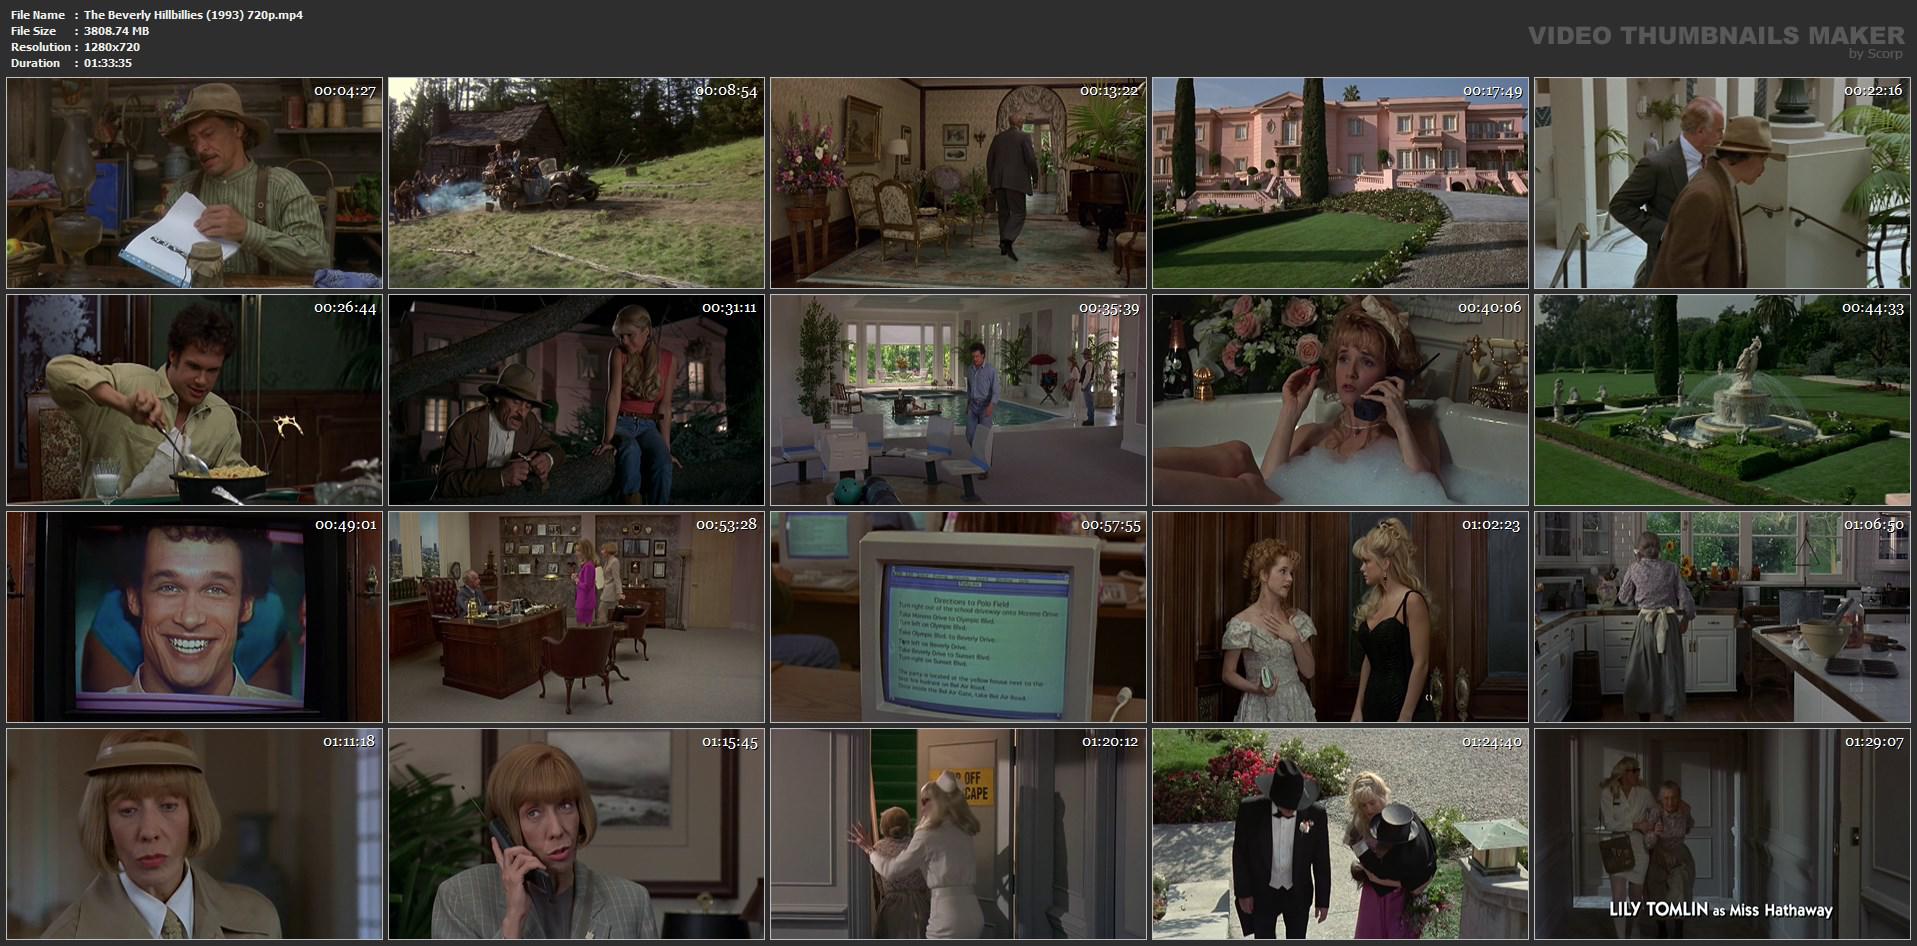 The Beverly Hillbillies (1993) 720p mp4 preview 0